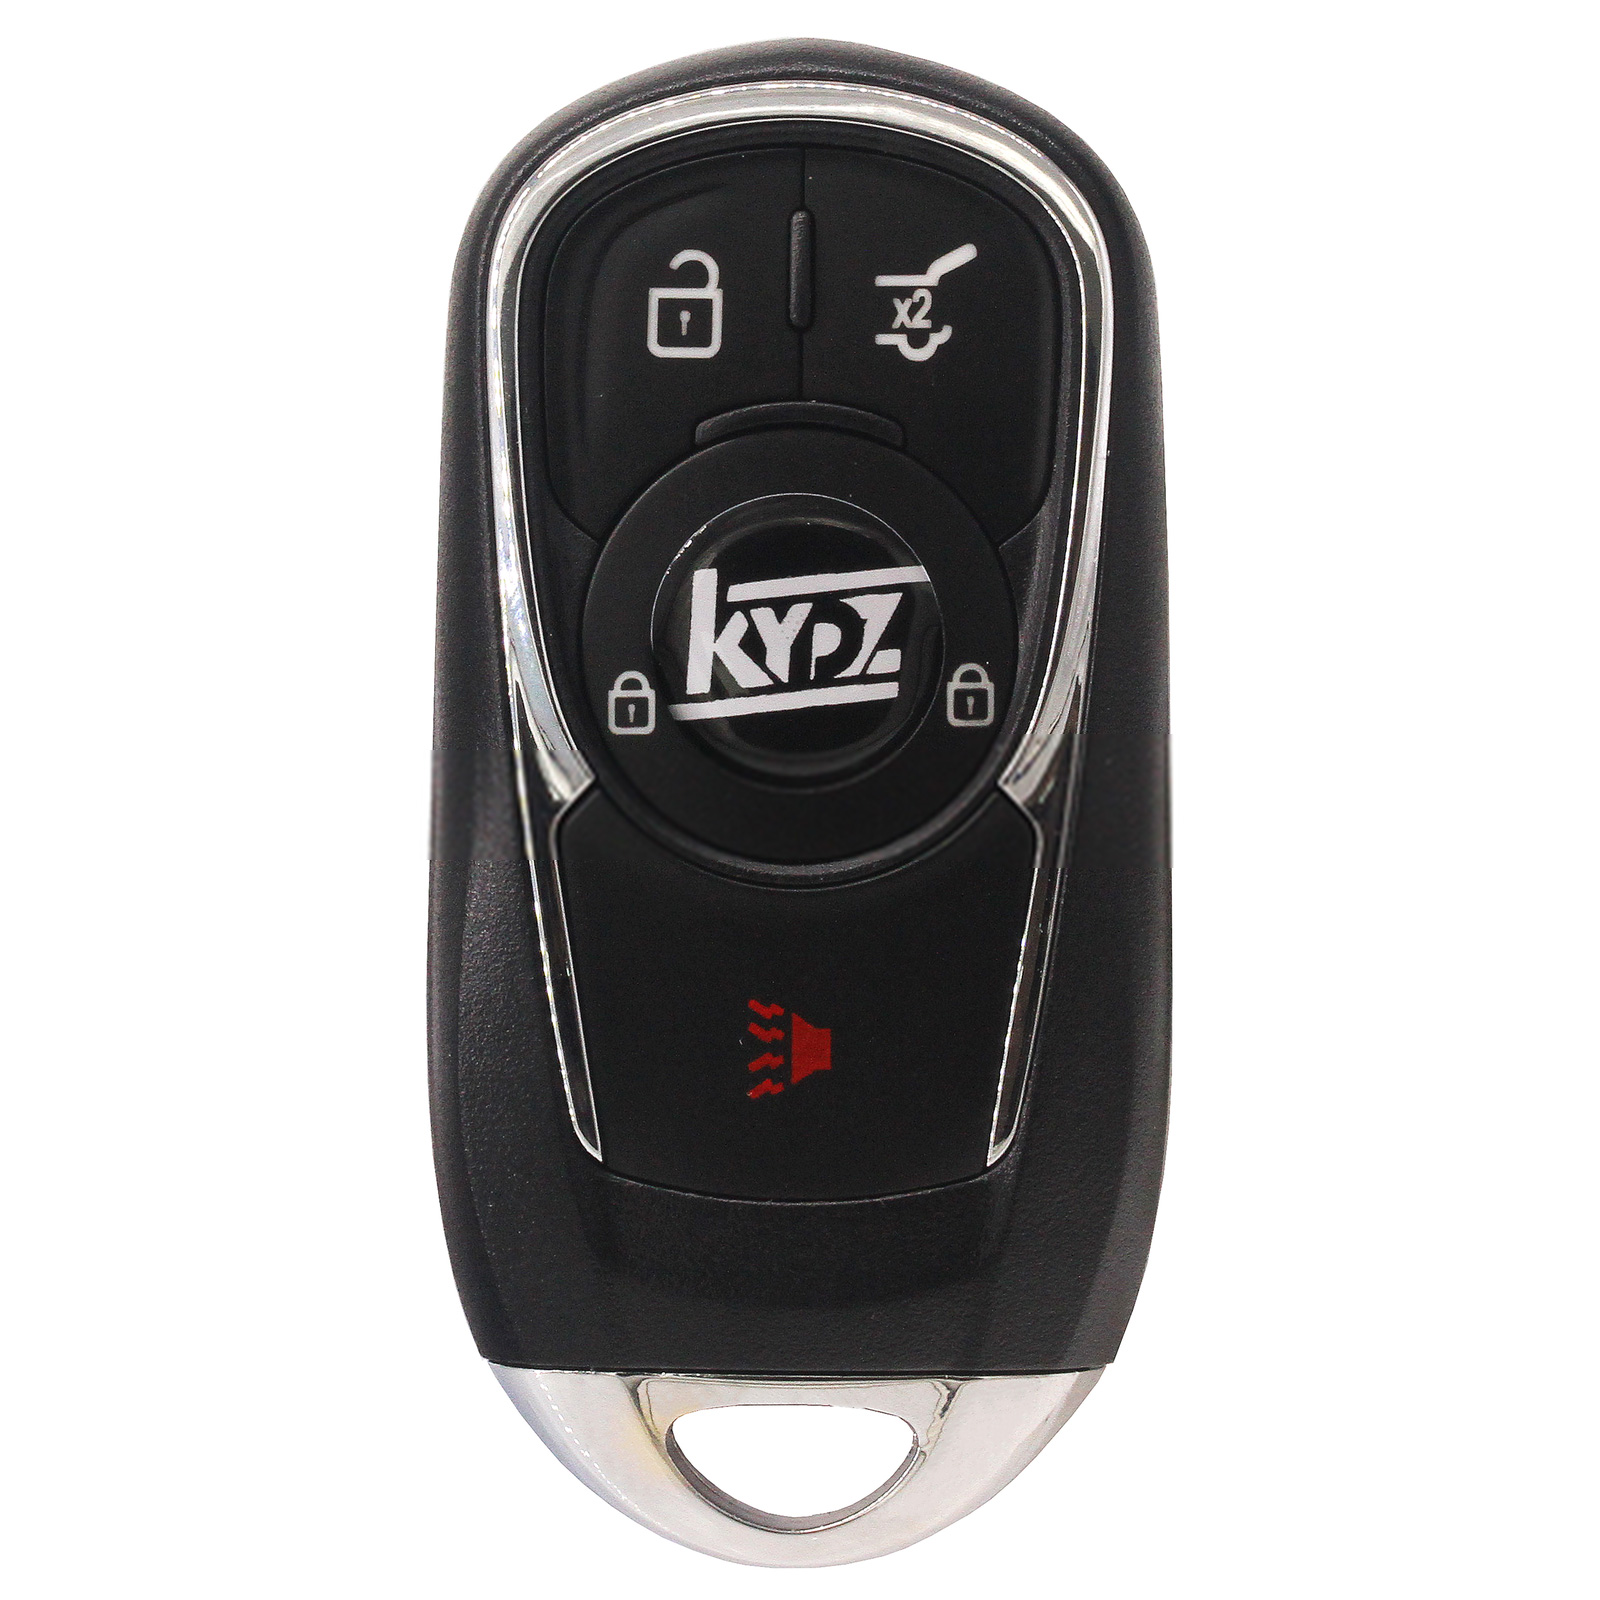 KYDZ03 Form Smart Model Model GM25-3+1 Button Without Spare Key US Version 3+1 Buttons U.S. - Pack of 5